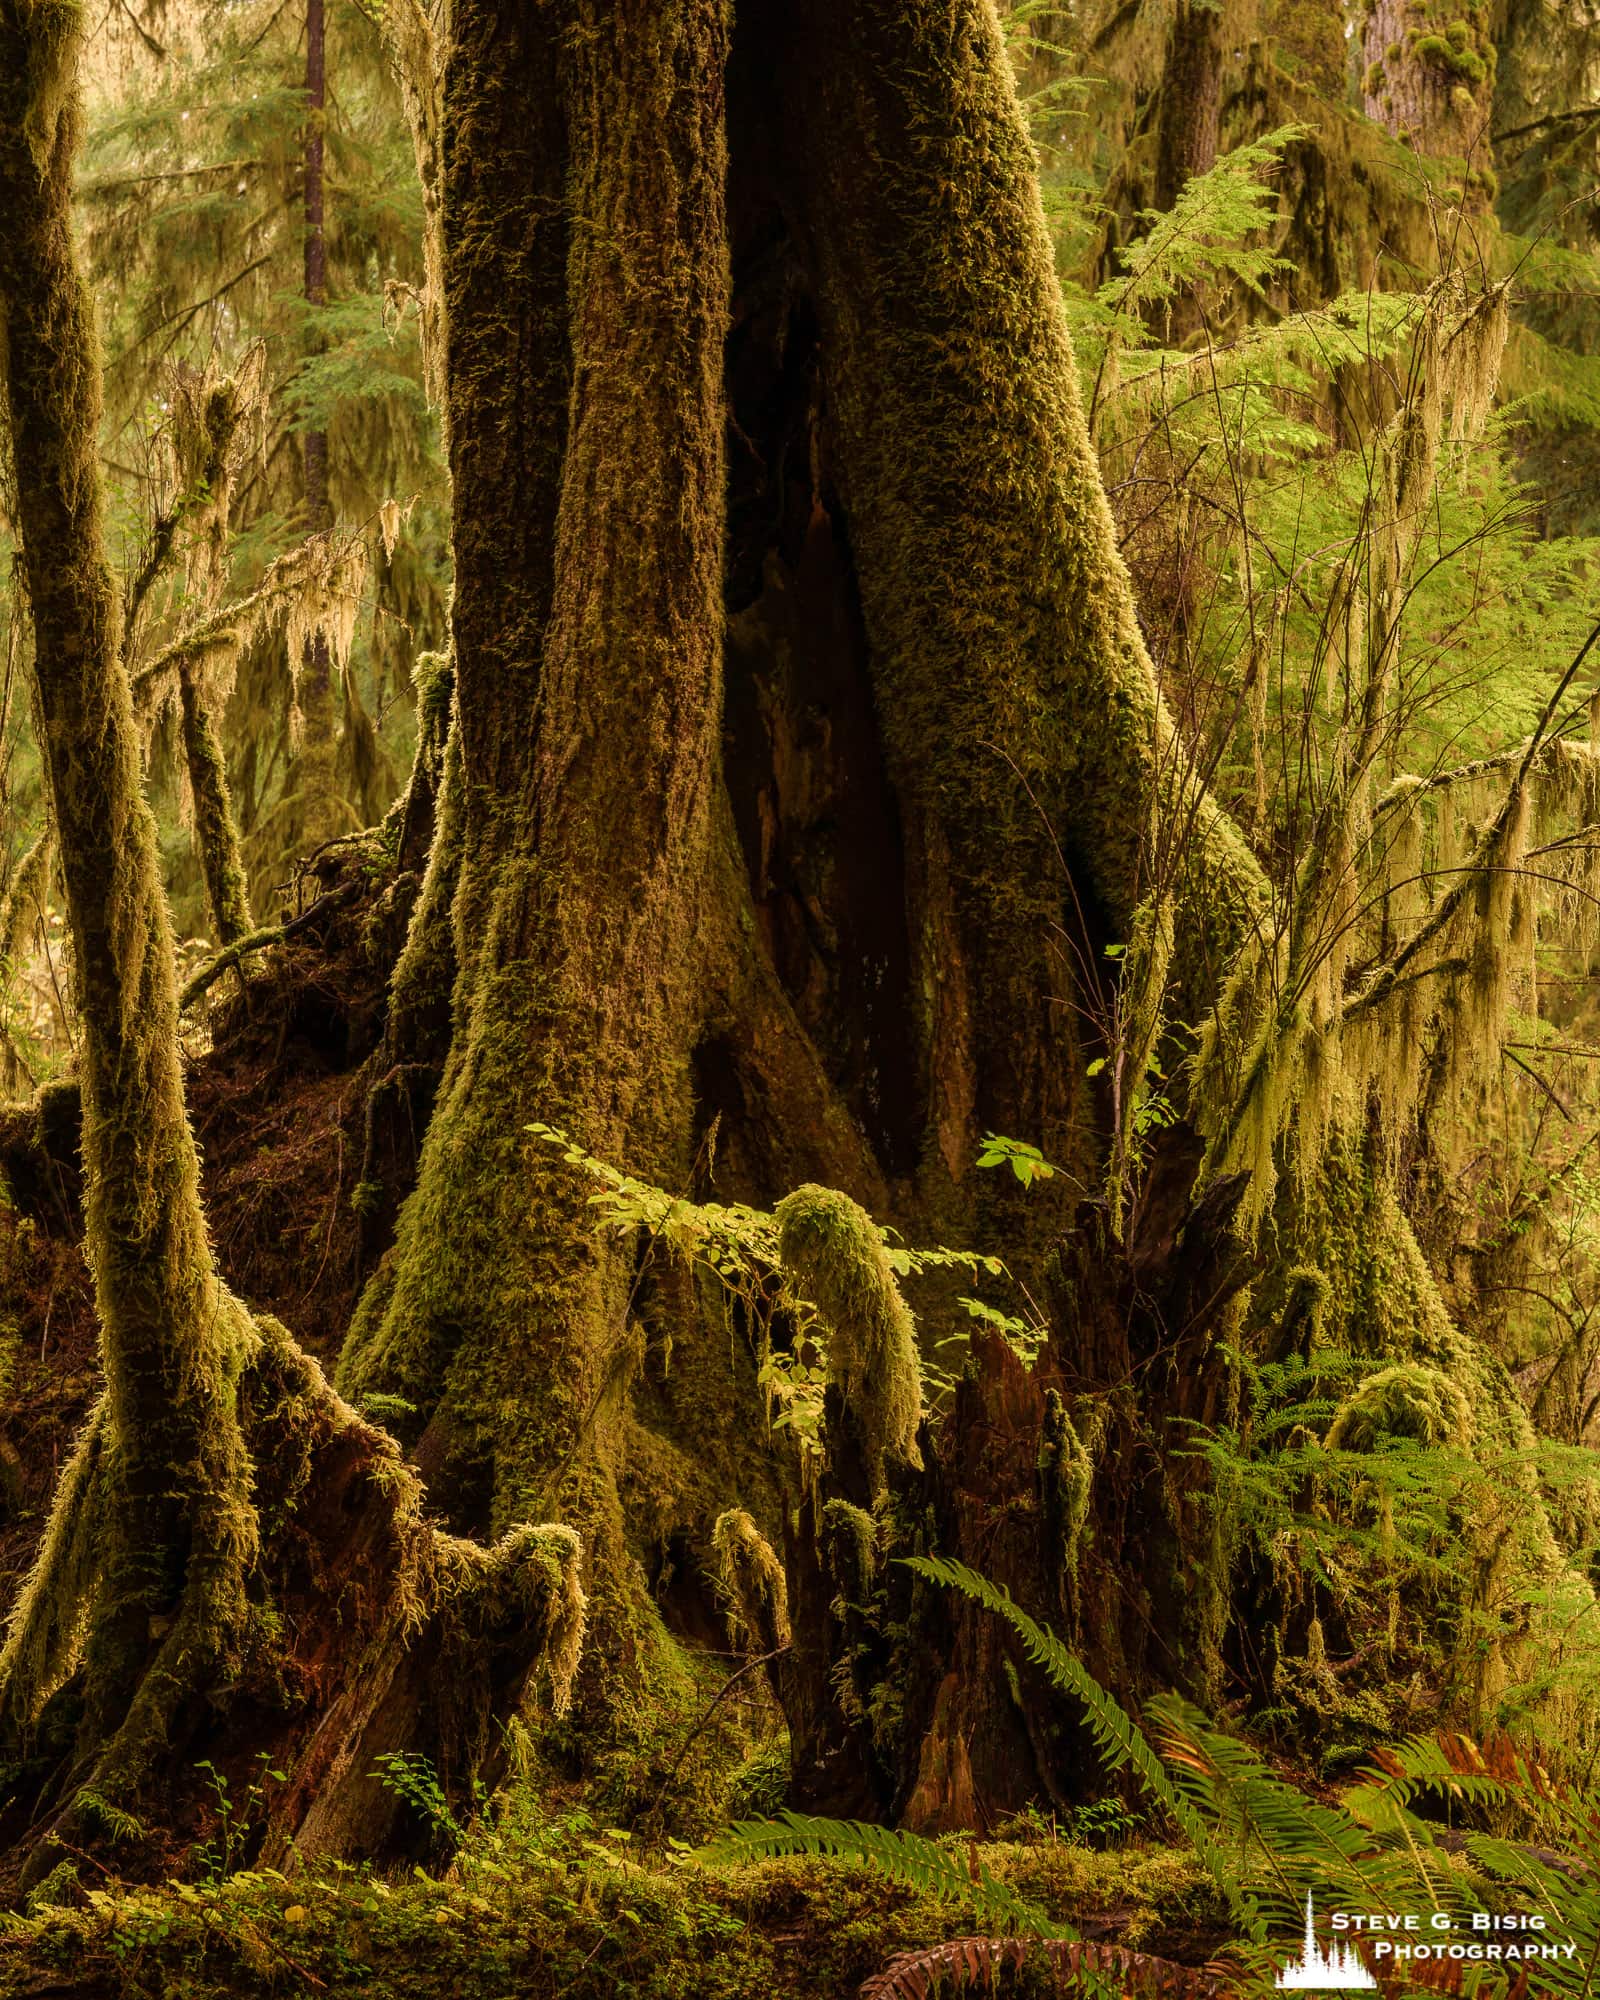 The majestic Hoh Rain Forest is one of the natural wonders of